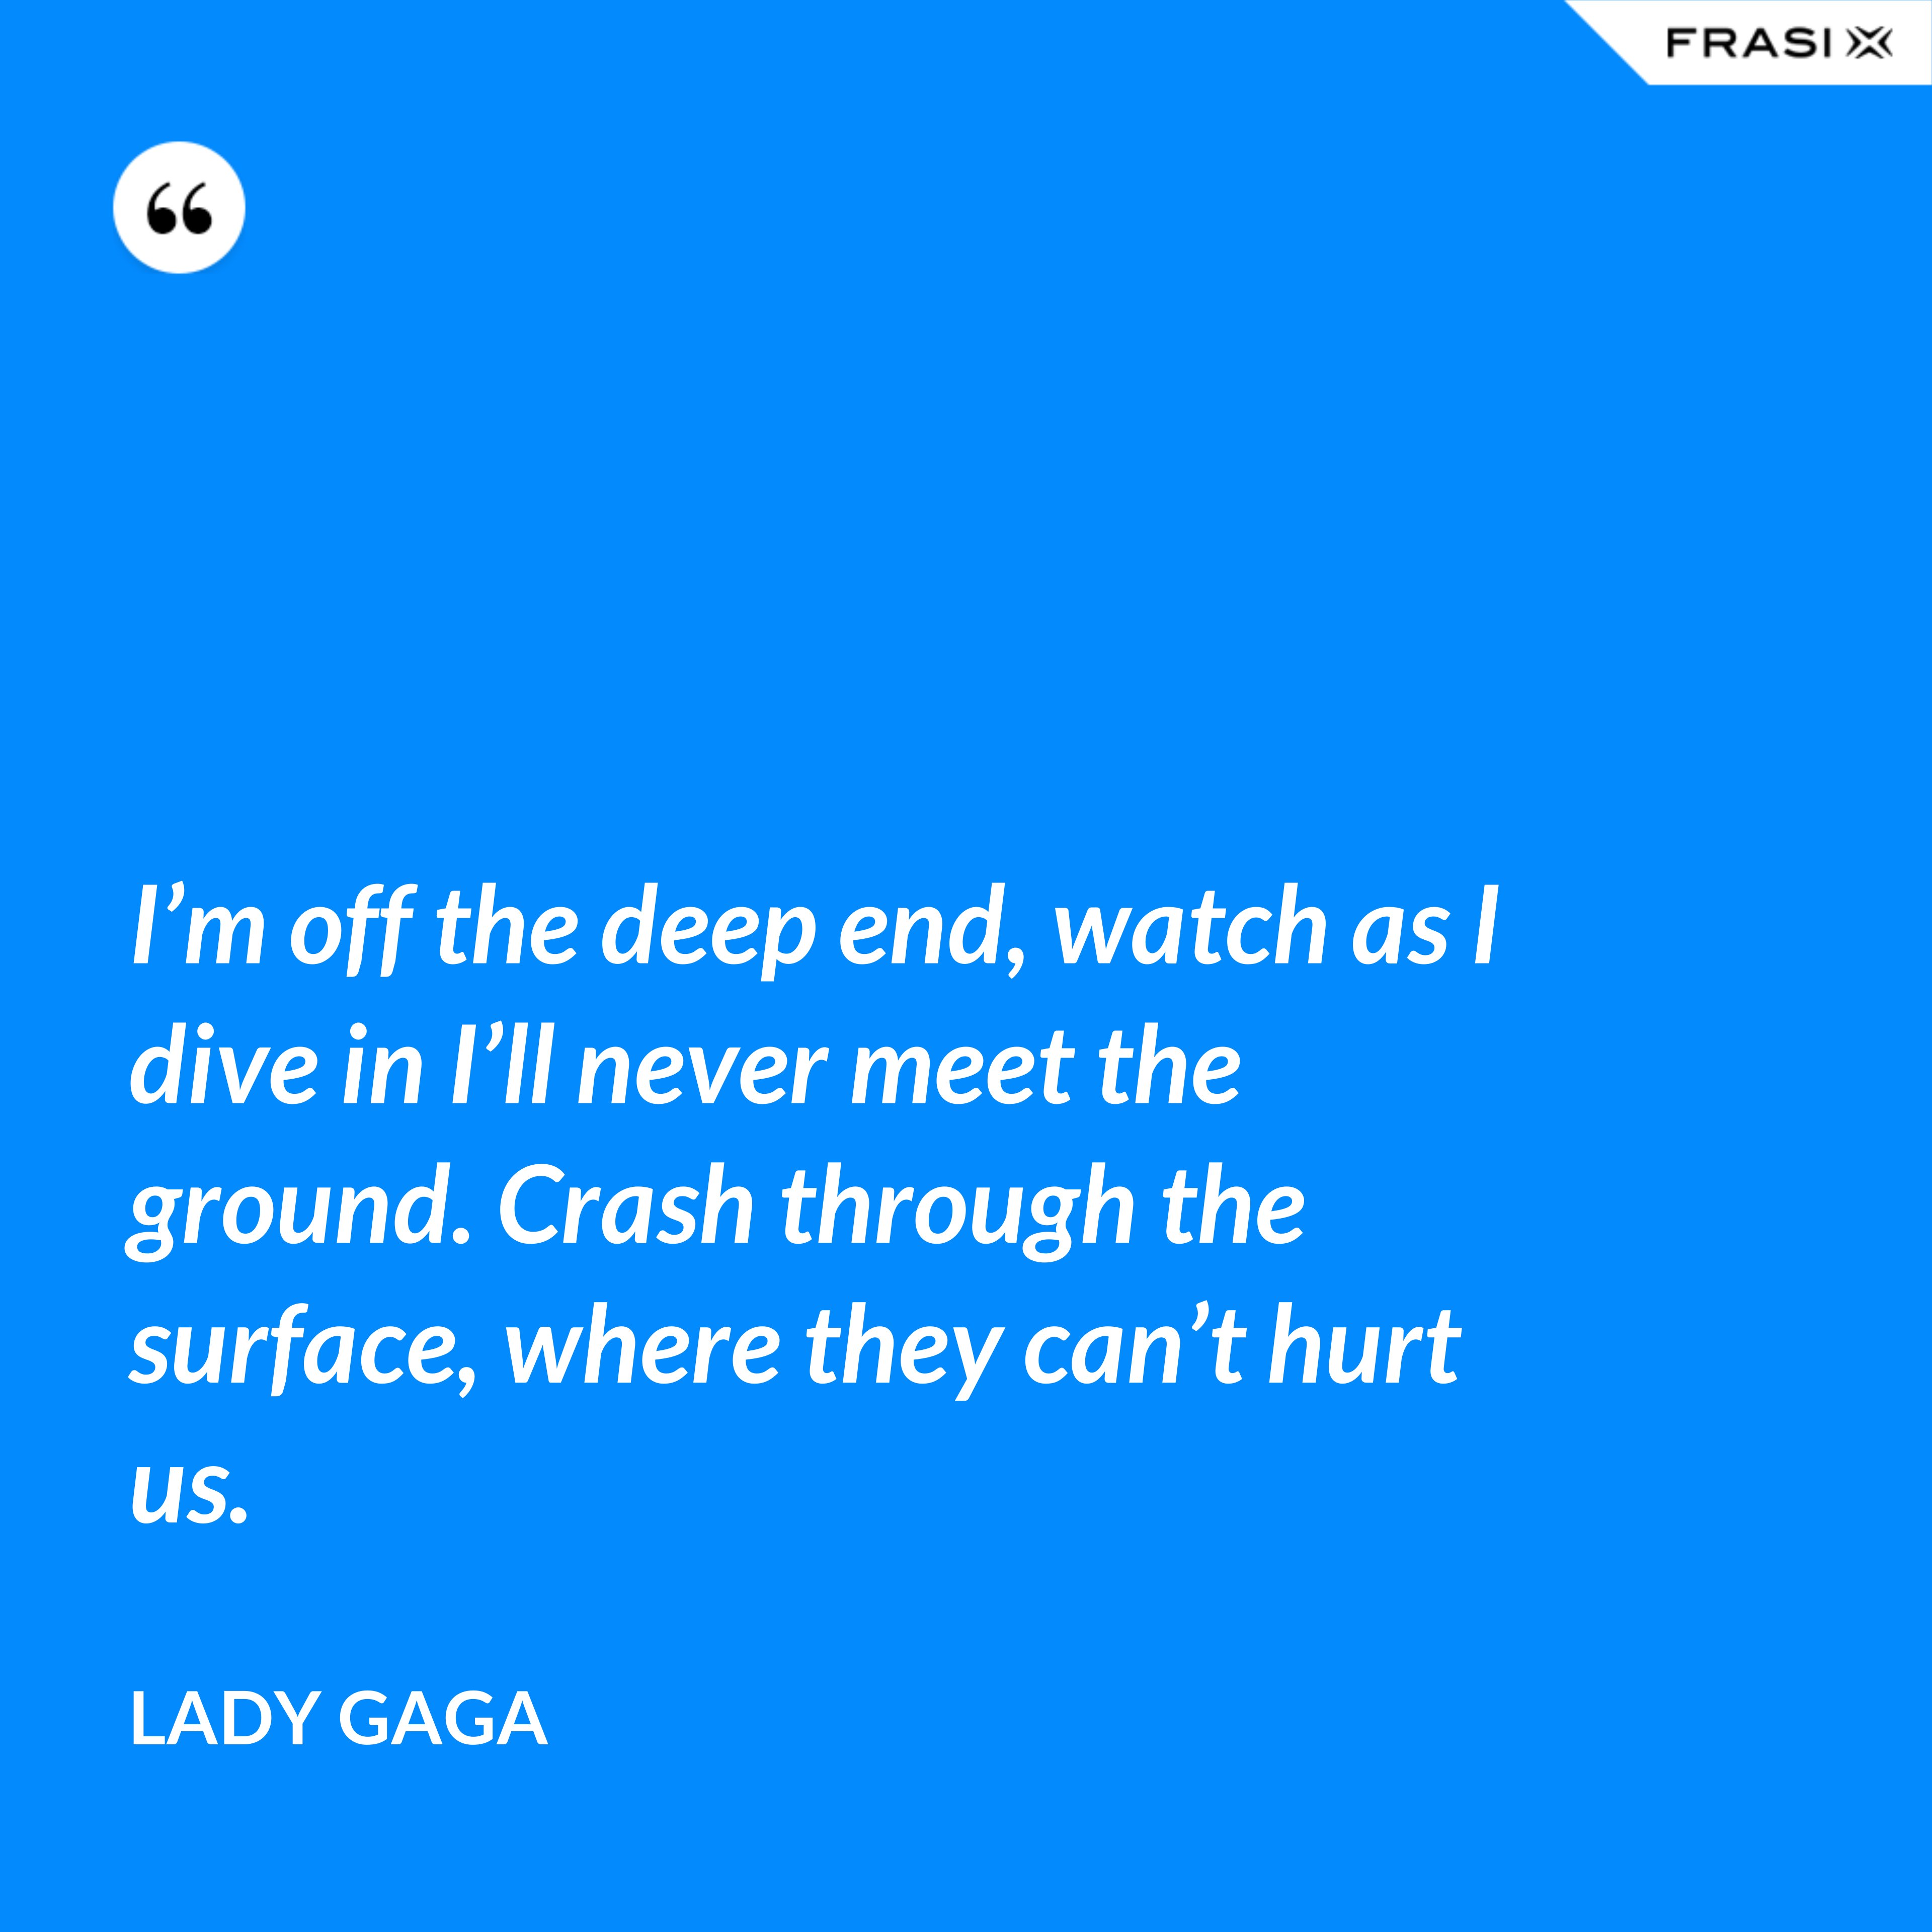 I’m off the deep end, watch as I dive in I’ll never meet the ground. Crash through the surface, where they can’t hurt us. - Lady Gaga